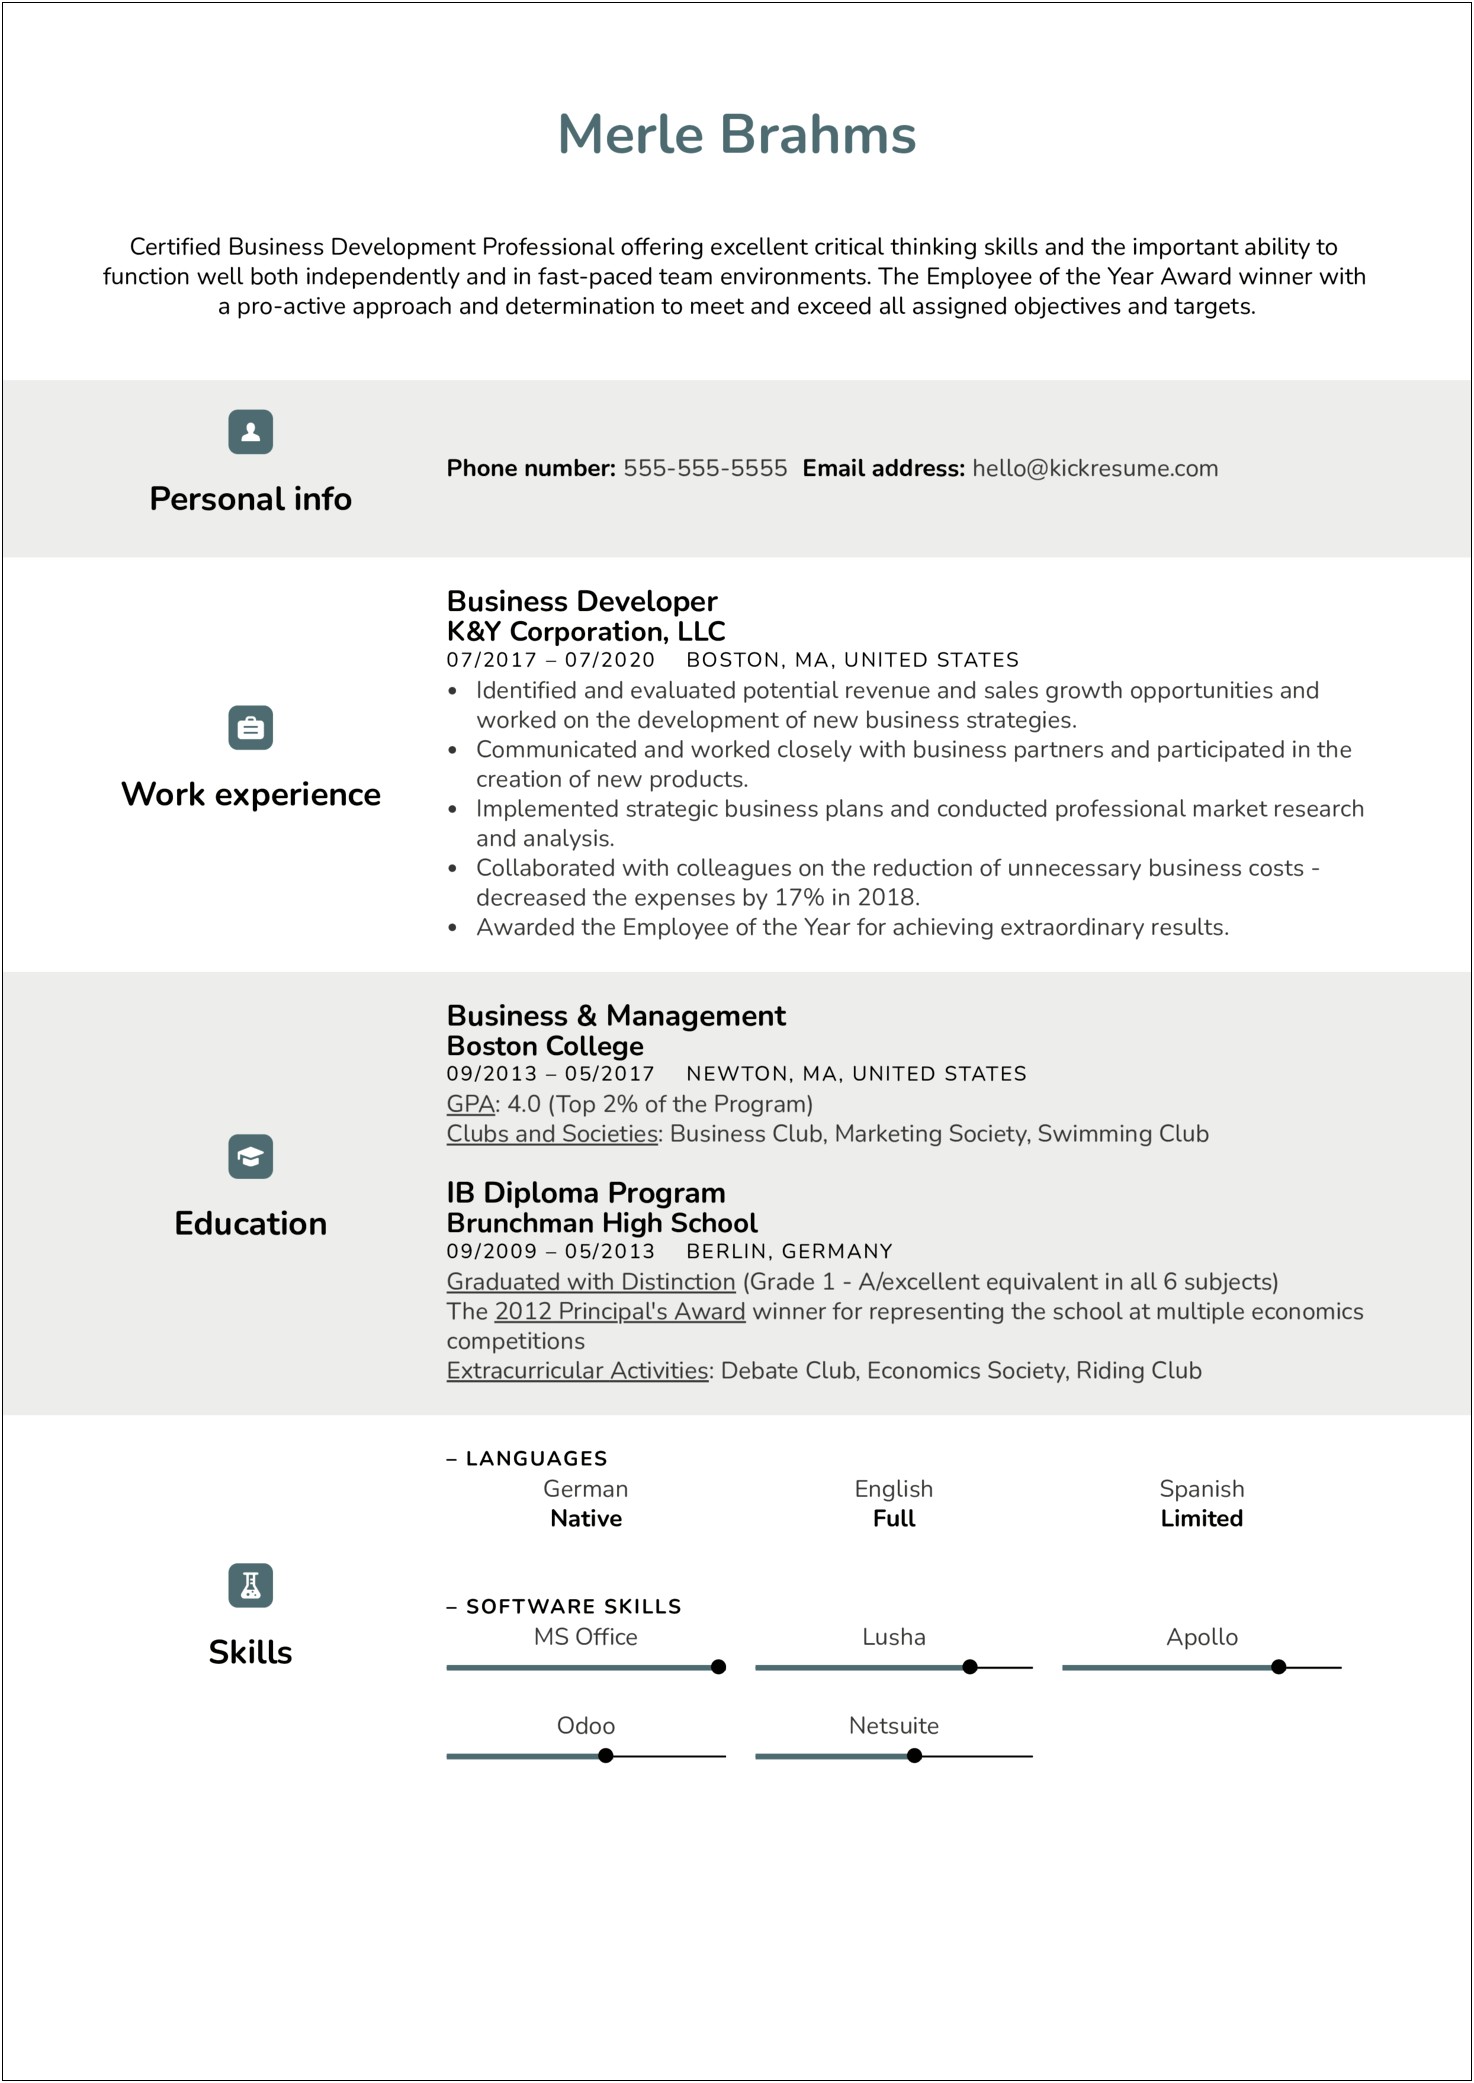 Resume Summary For 1 Year Experience Developer